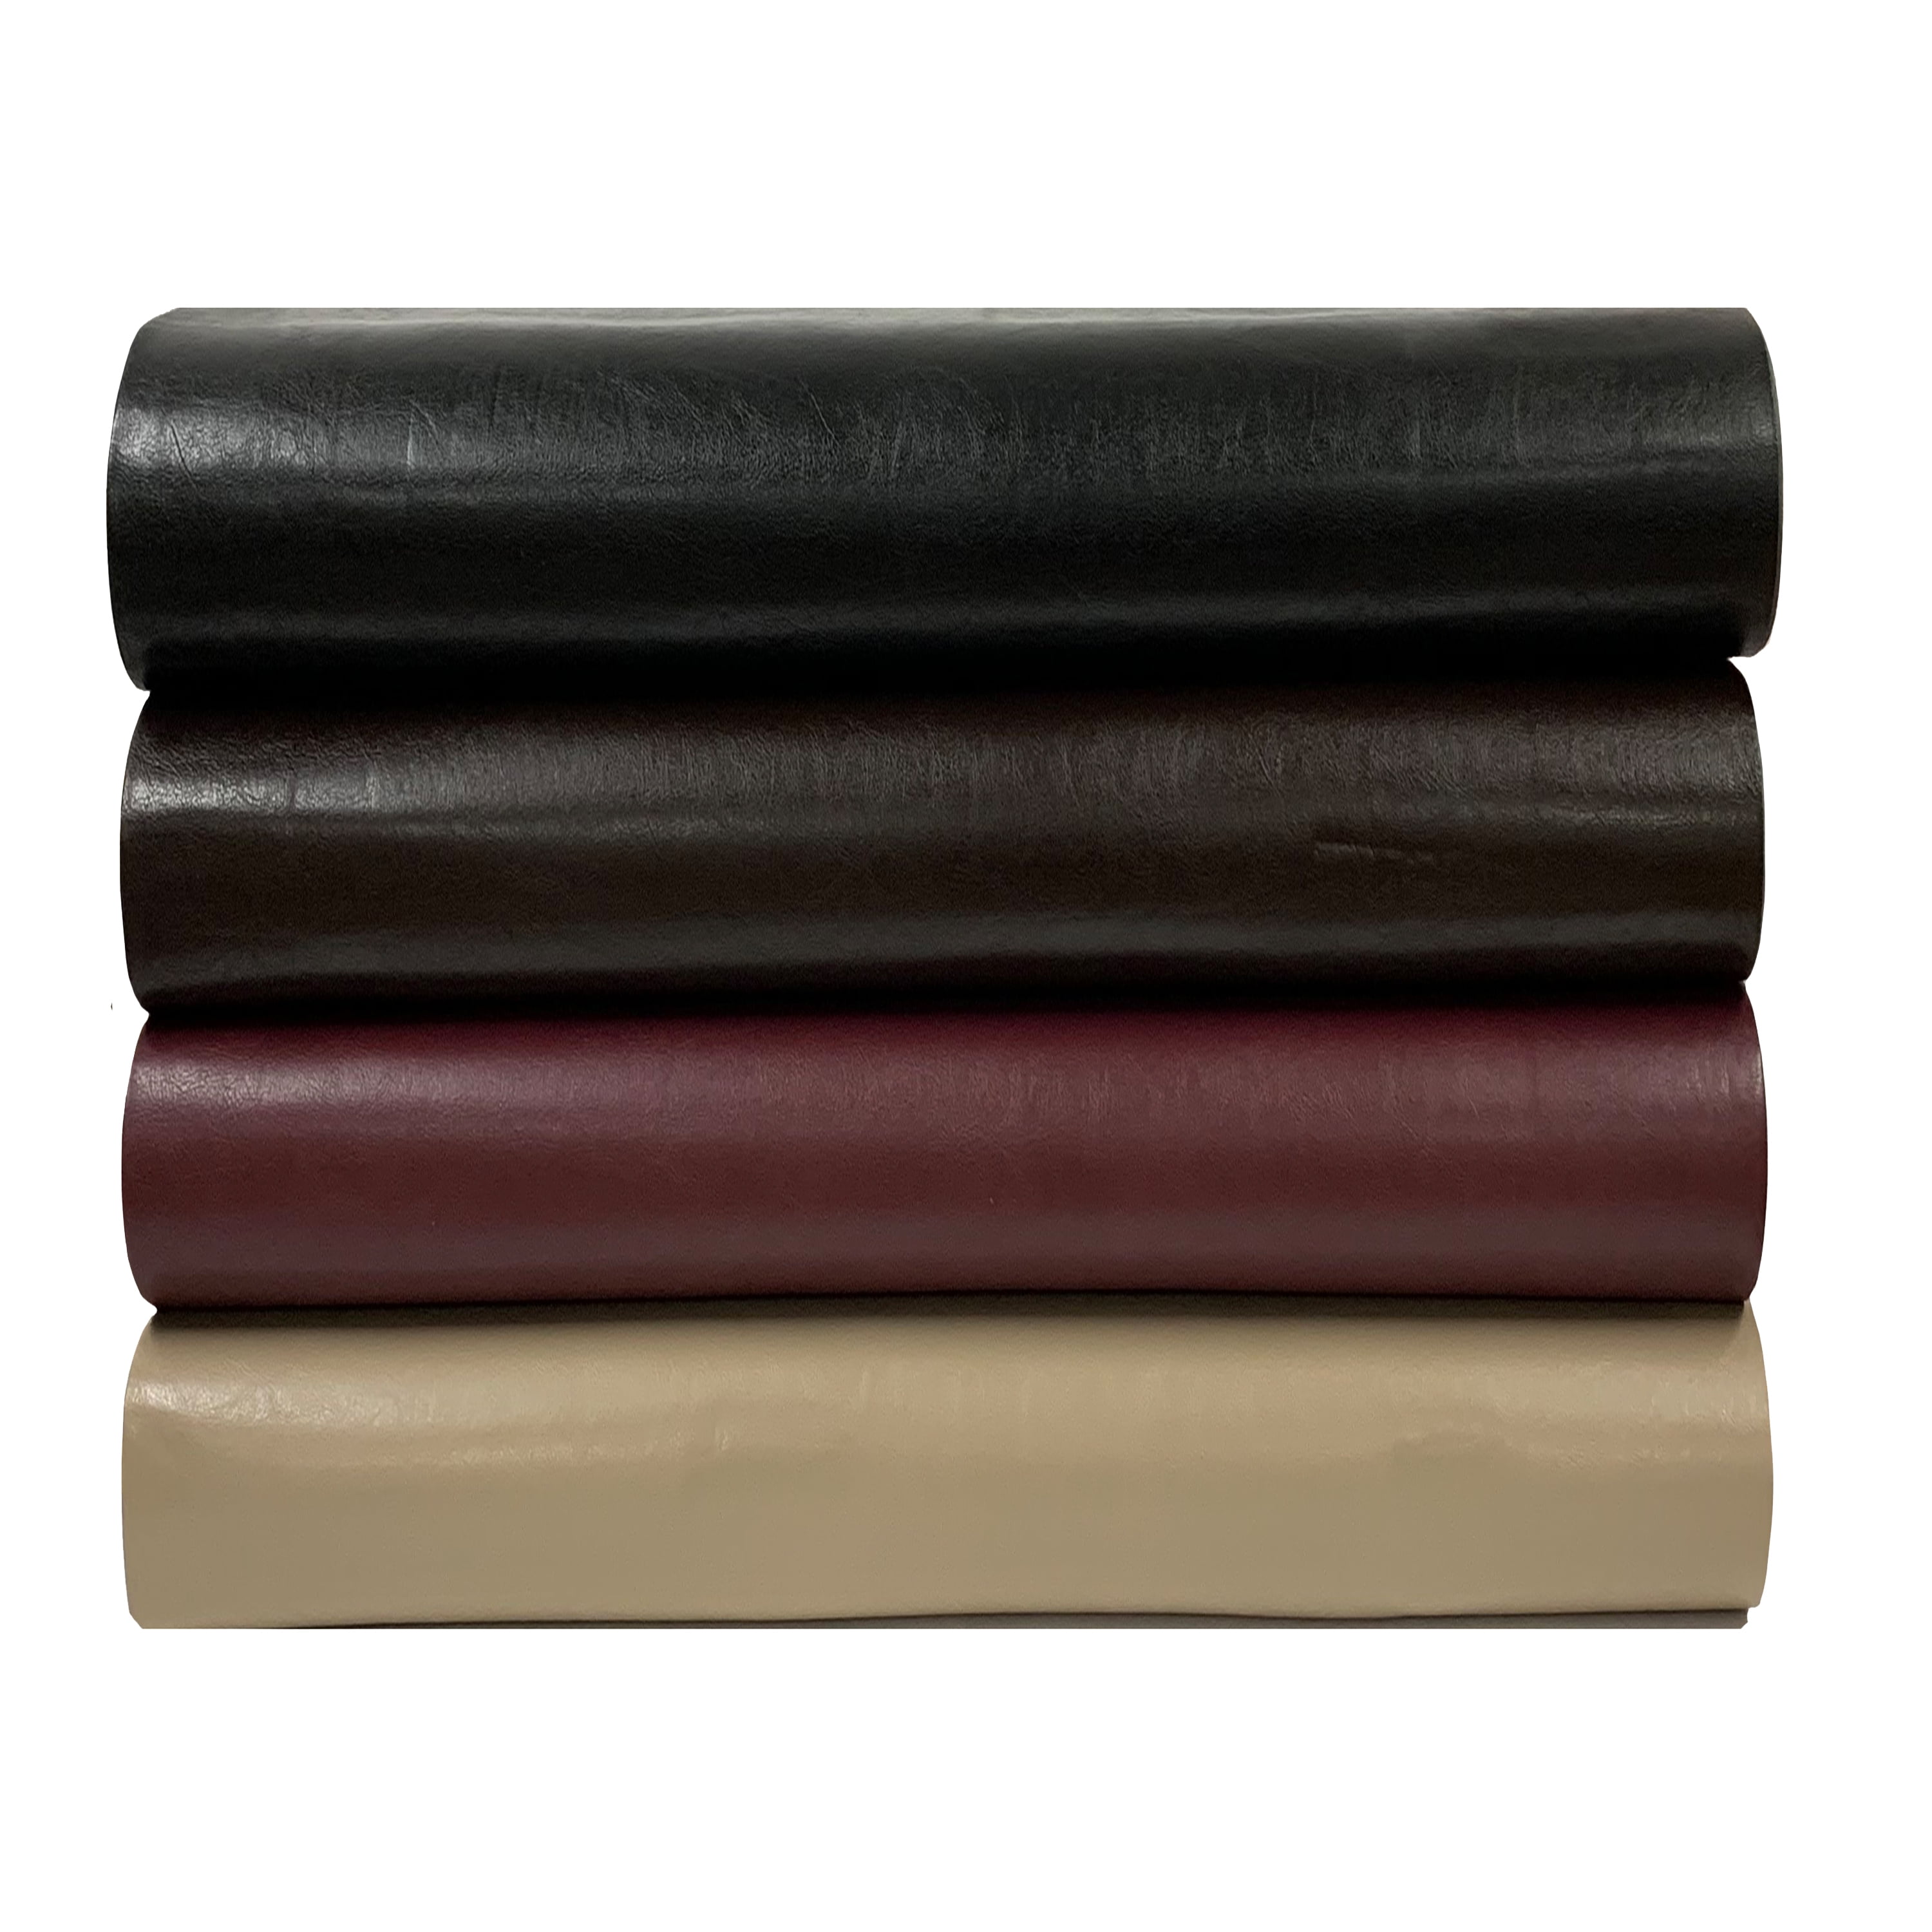 Shason Textile Faux Leather Upholstery, Brown Faux Leather Fabric